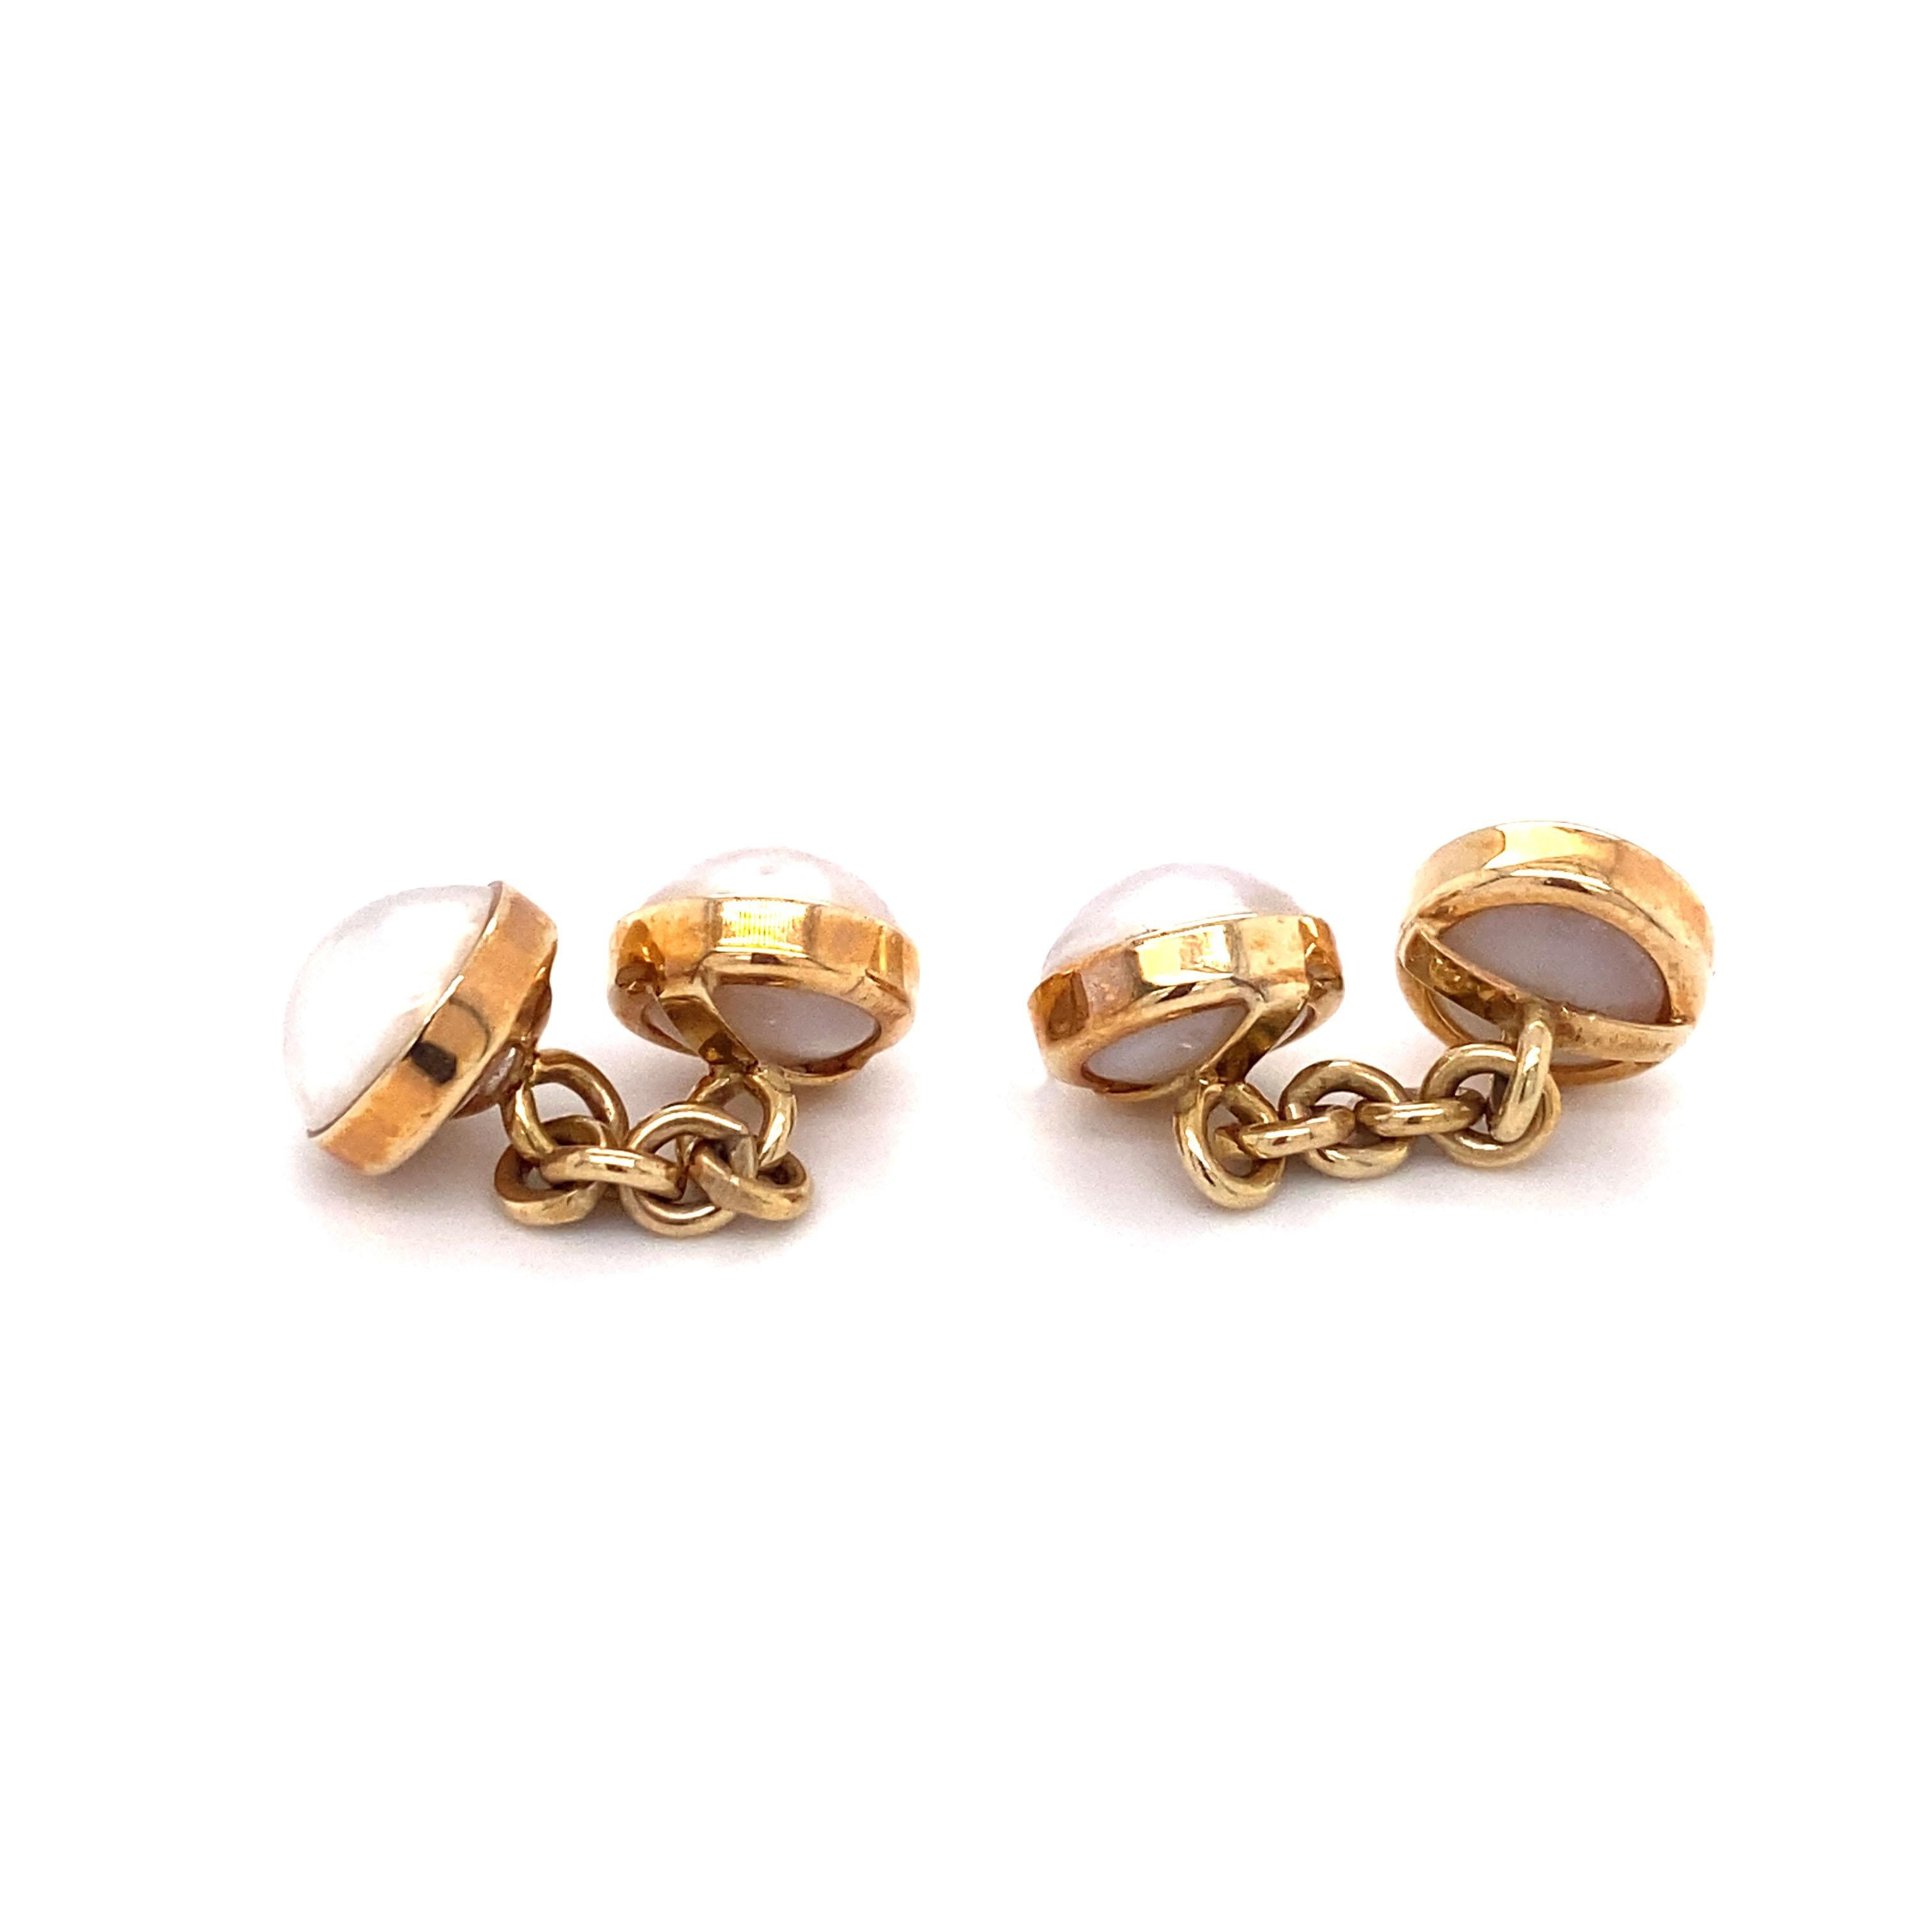 Circa: 1980s
Metal Type: 14k yellow gold
Size: 0.75in L
Weight: 4.3g